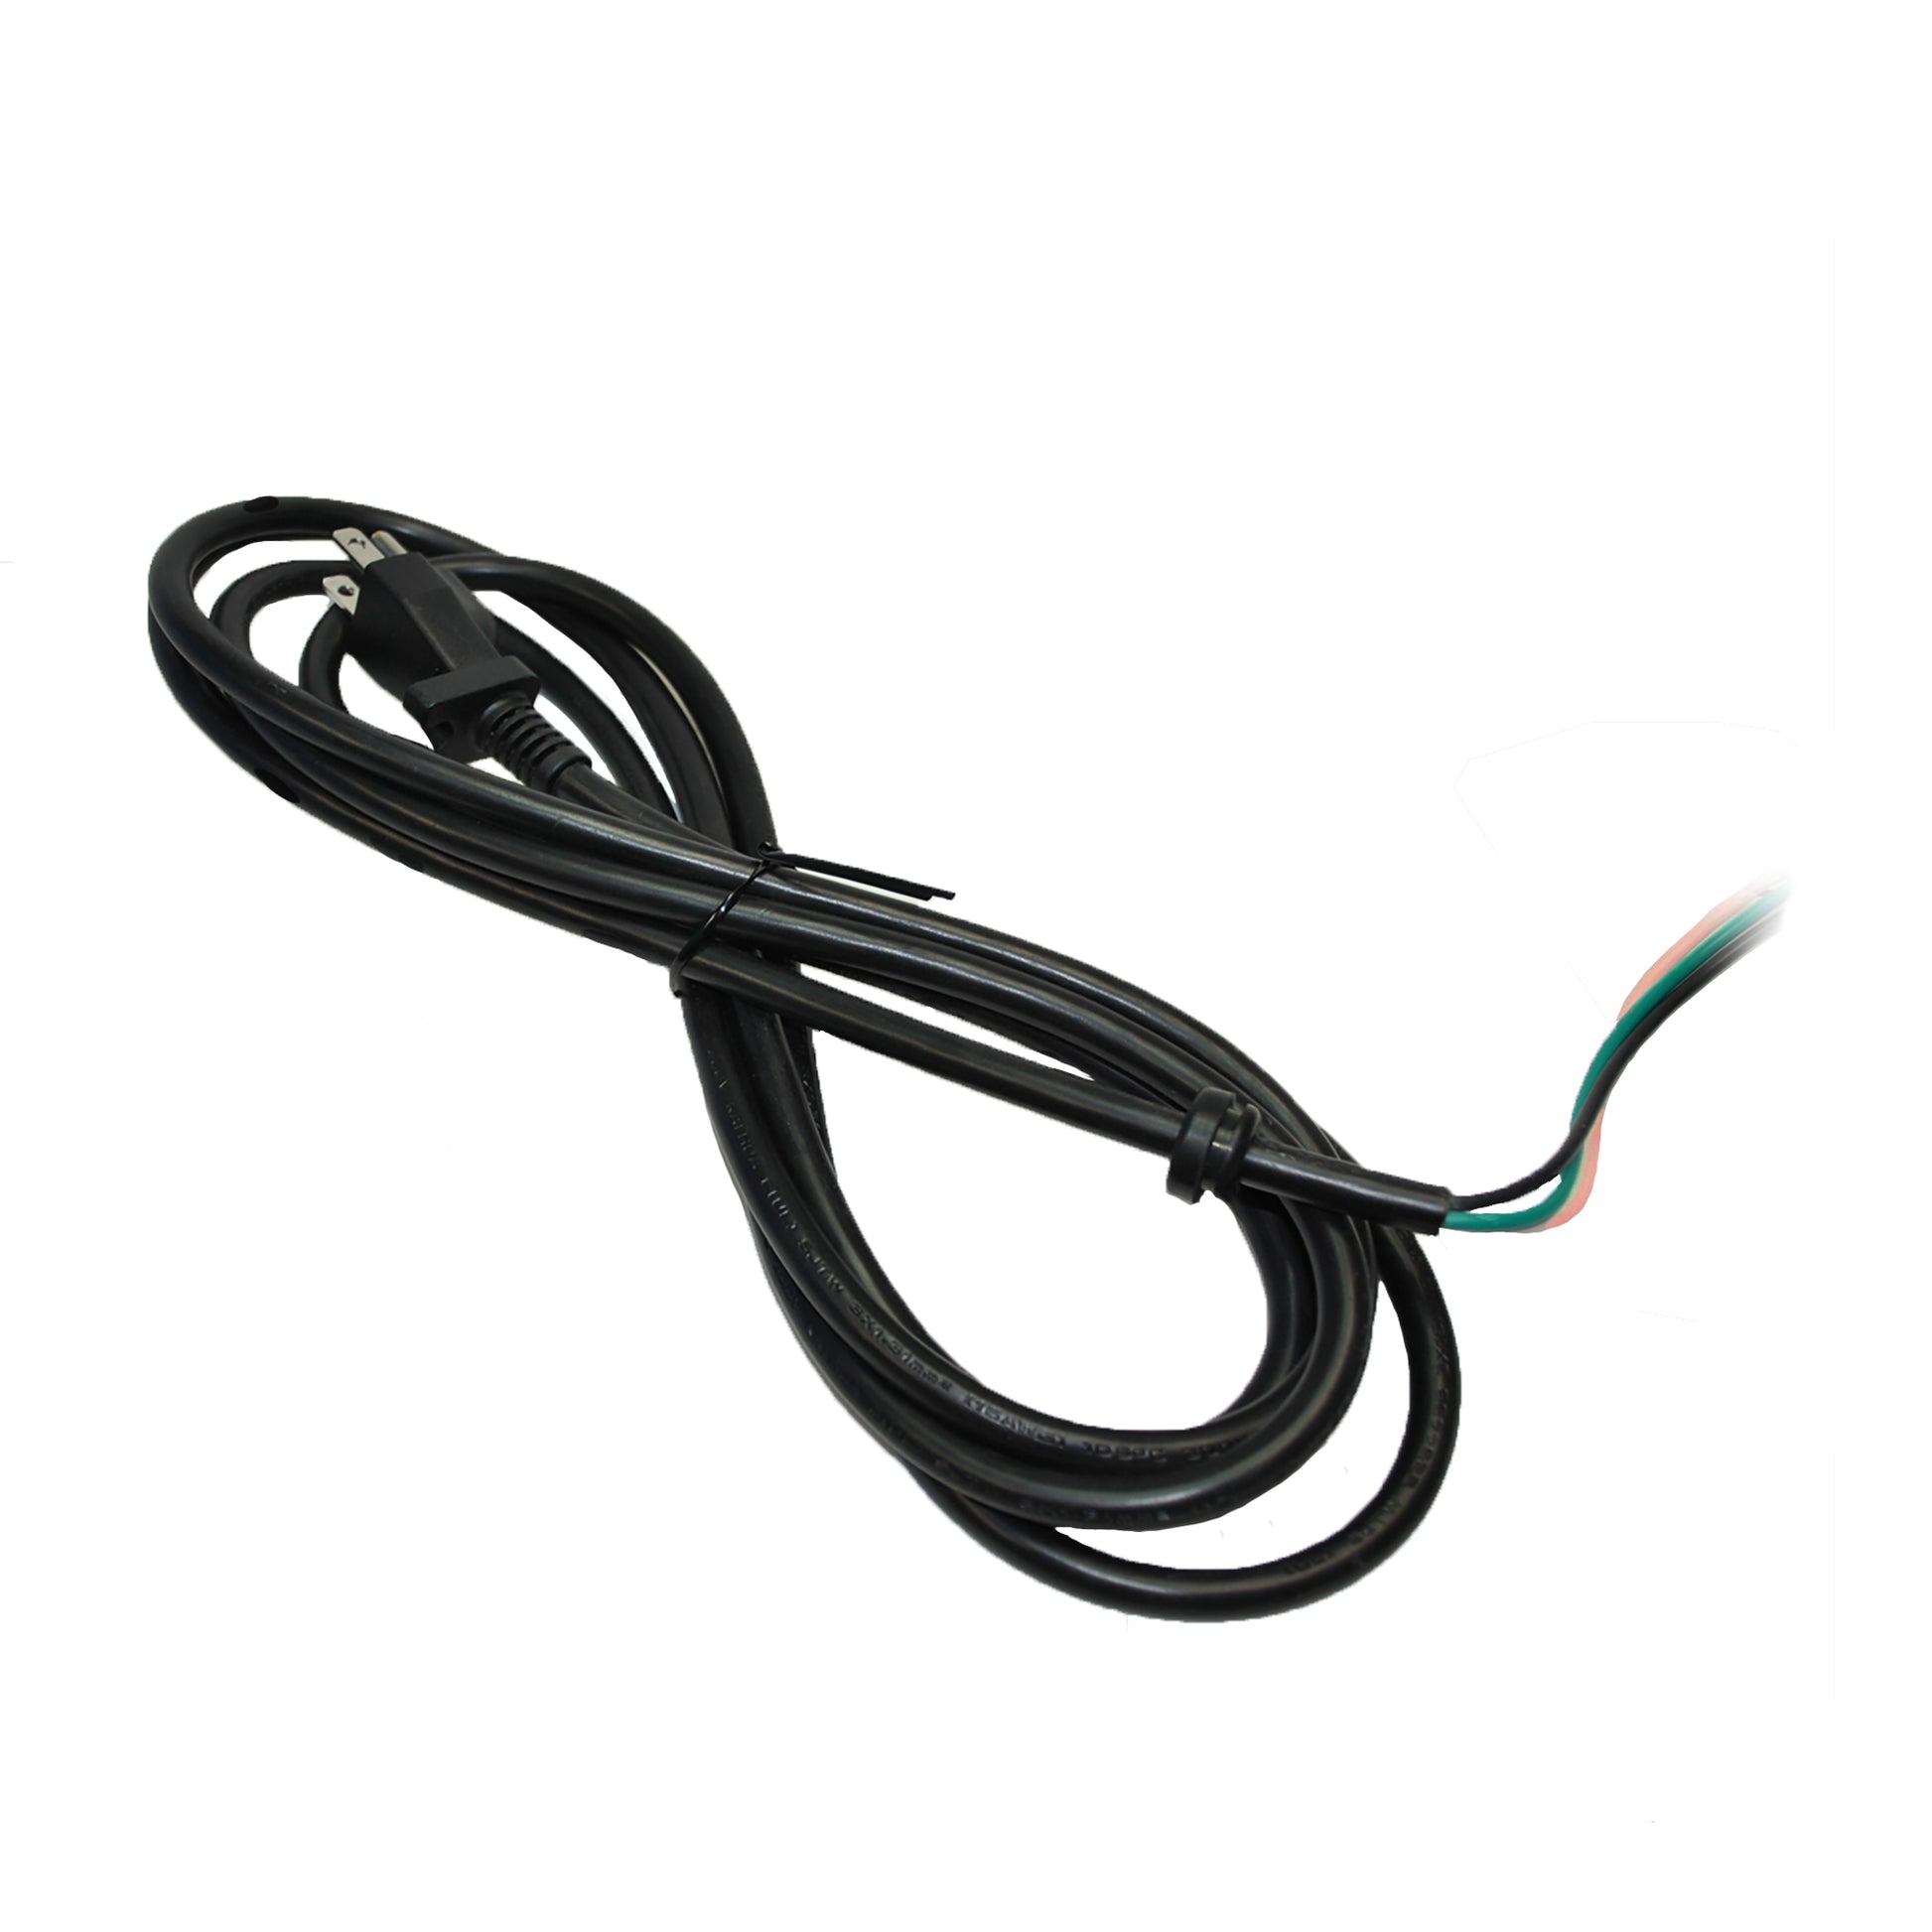 Power Cord for X-600 Air Mover